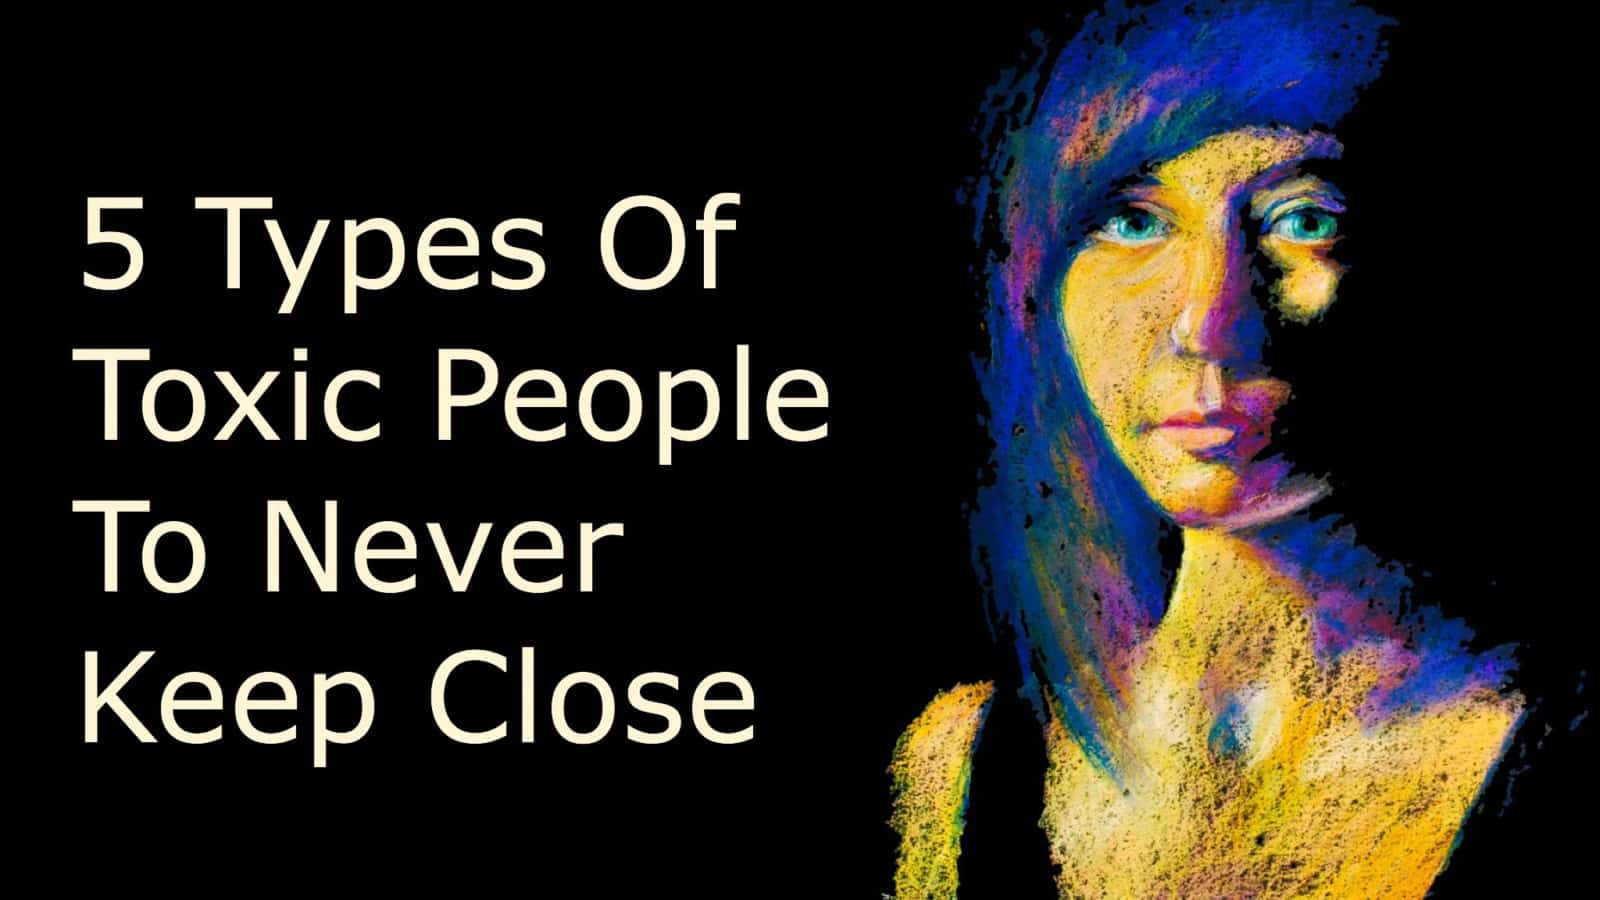 5 Types of Toxic People To Never Keep Close